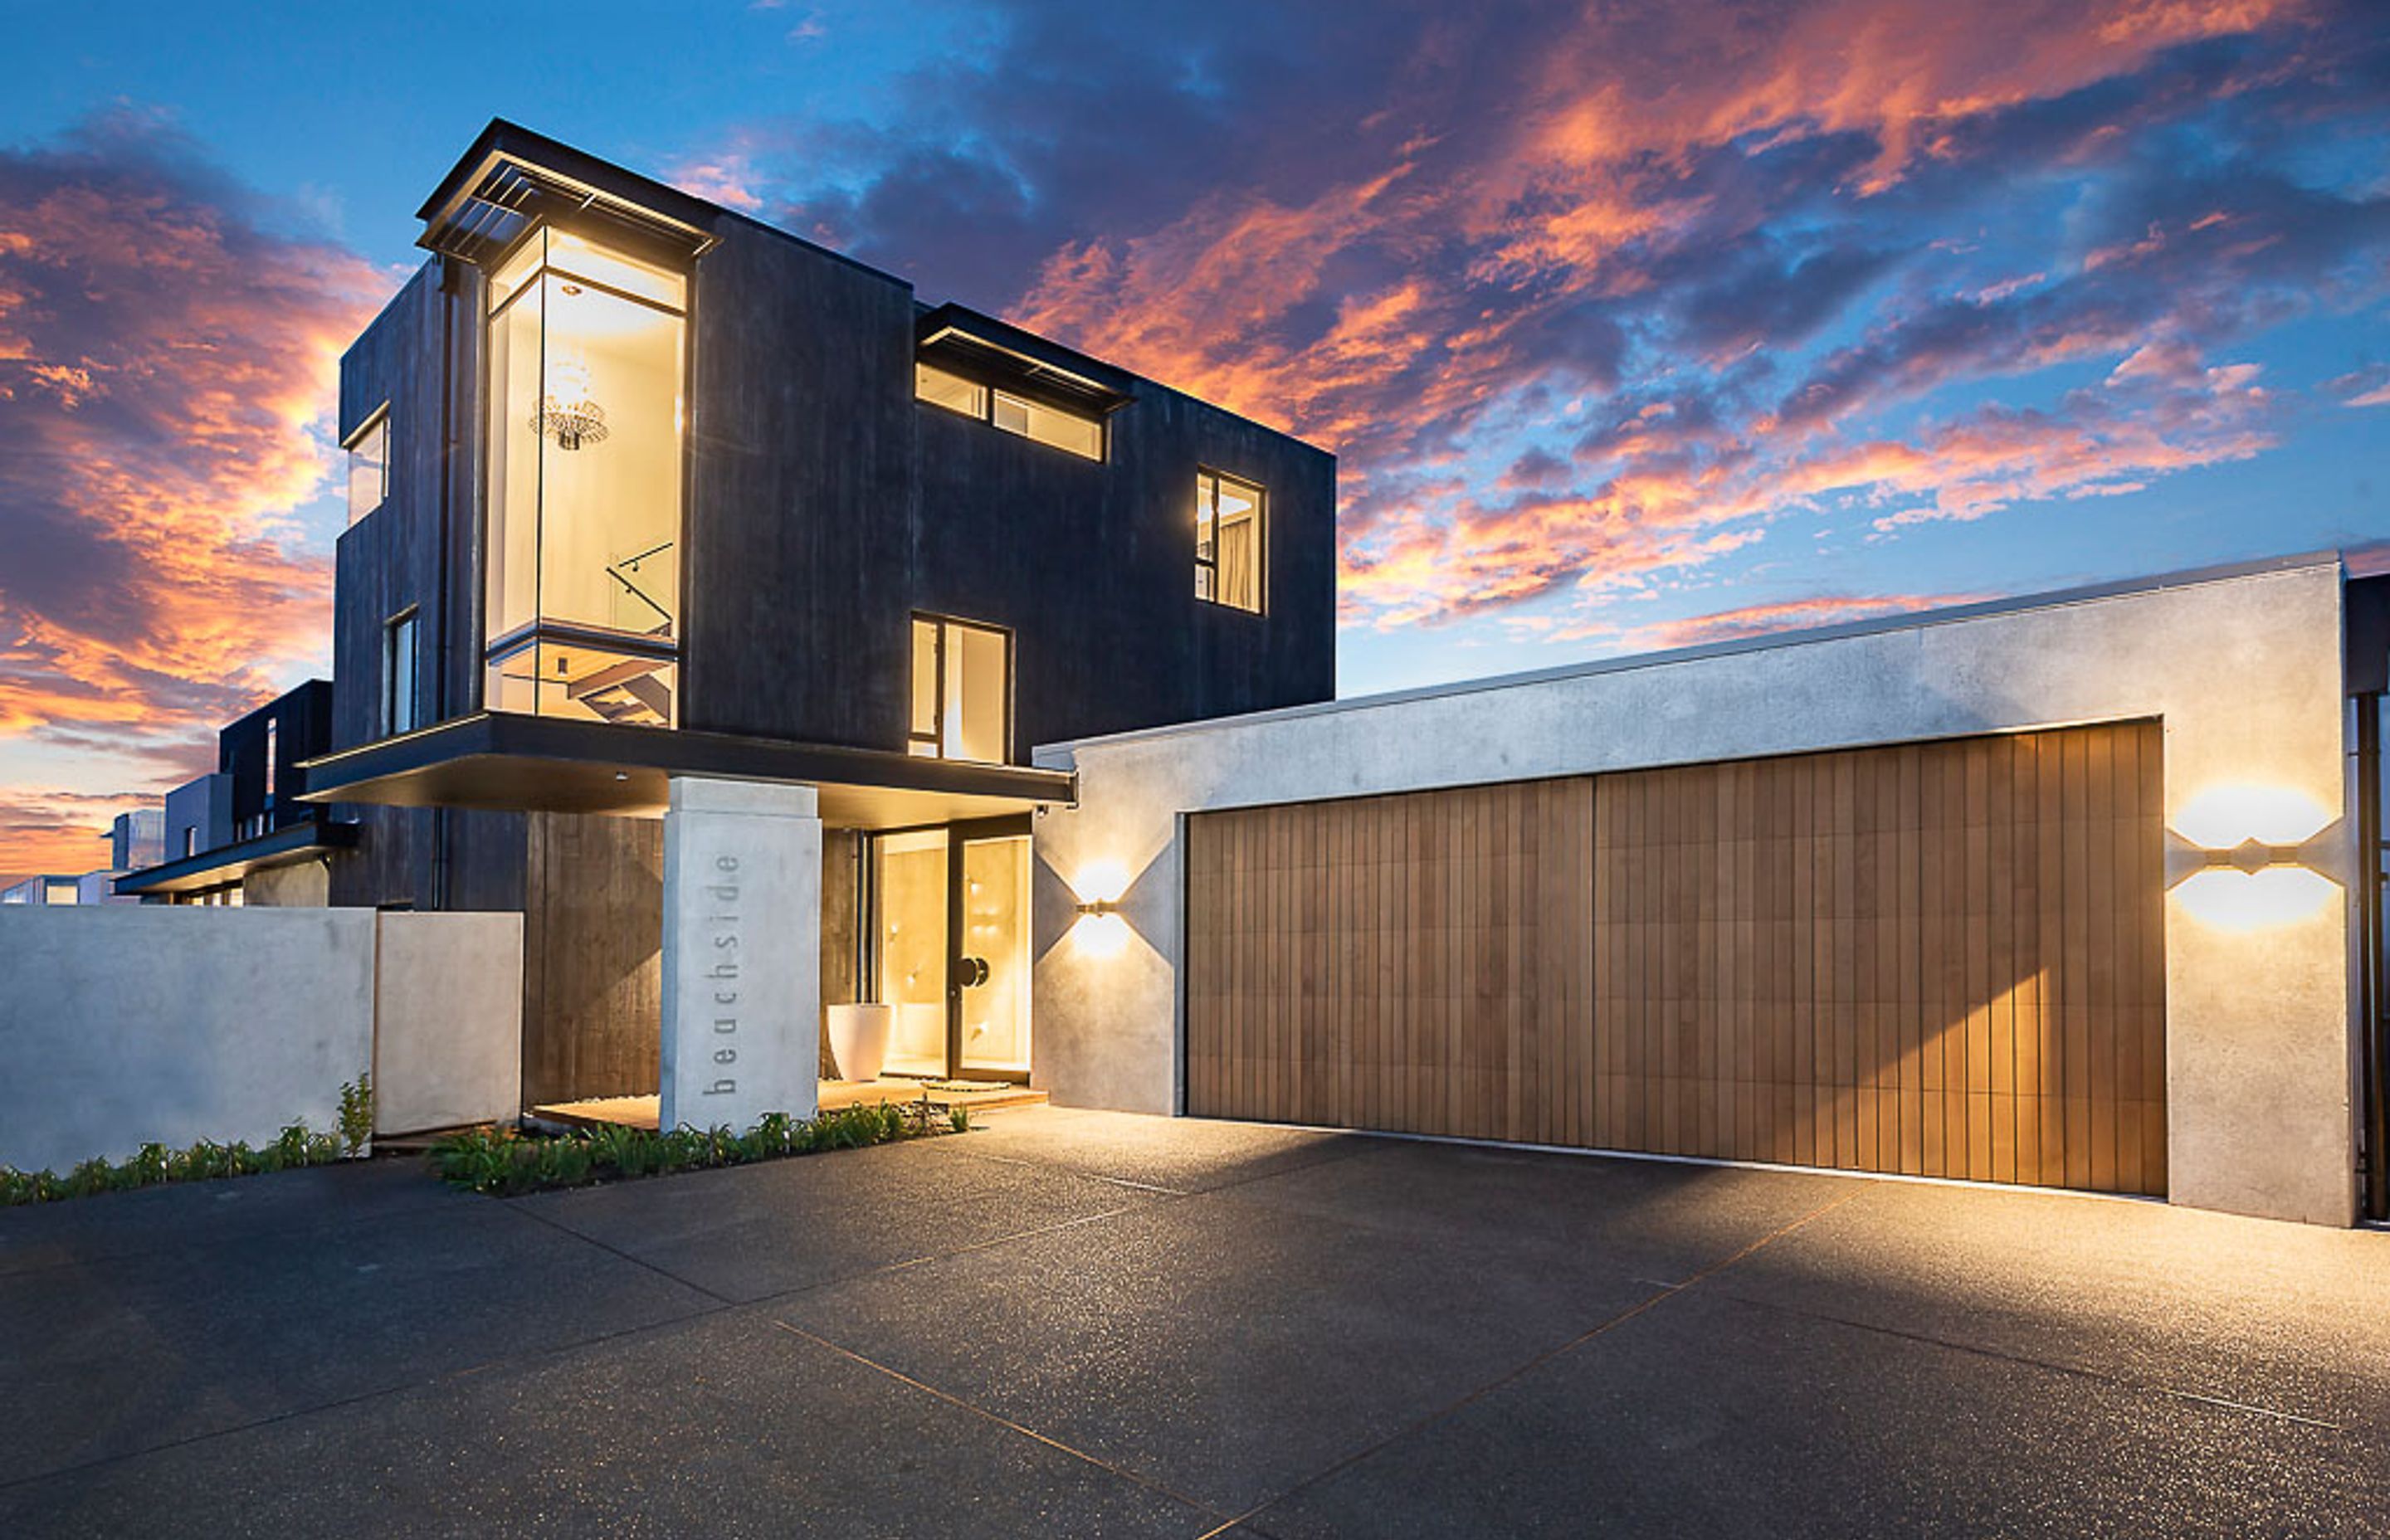 The entry court provides a welcoming mix of materiality, with the cedar garage door and the natural and dyed concrete.